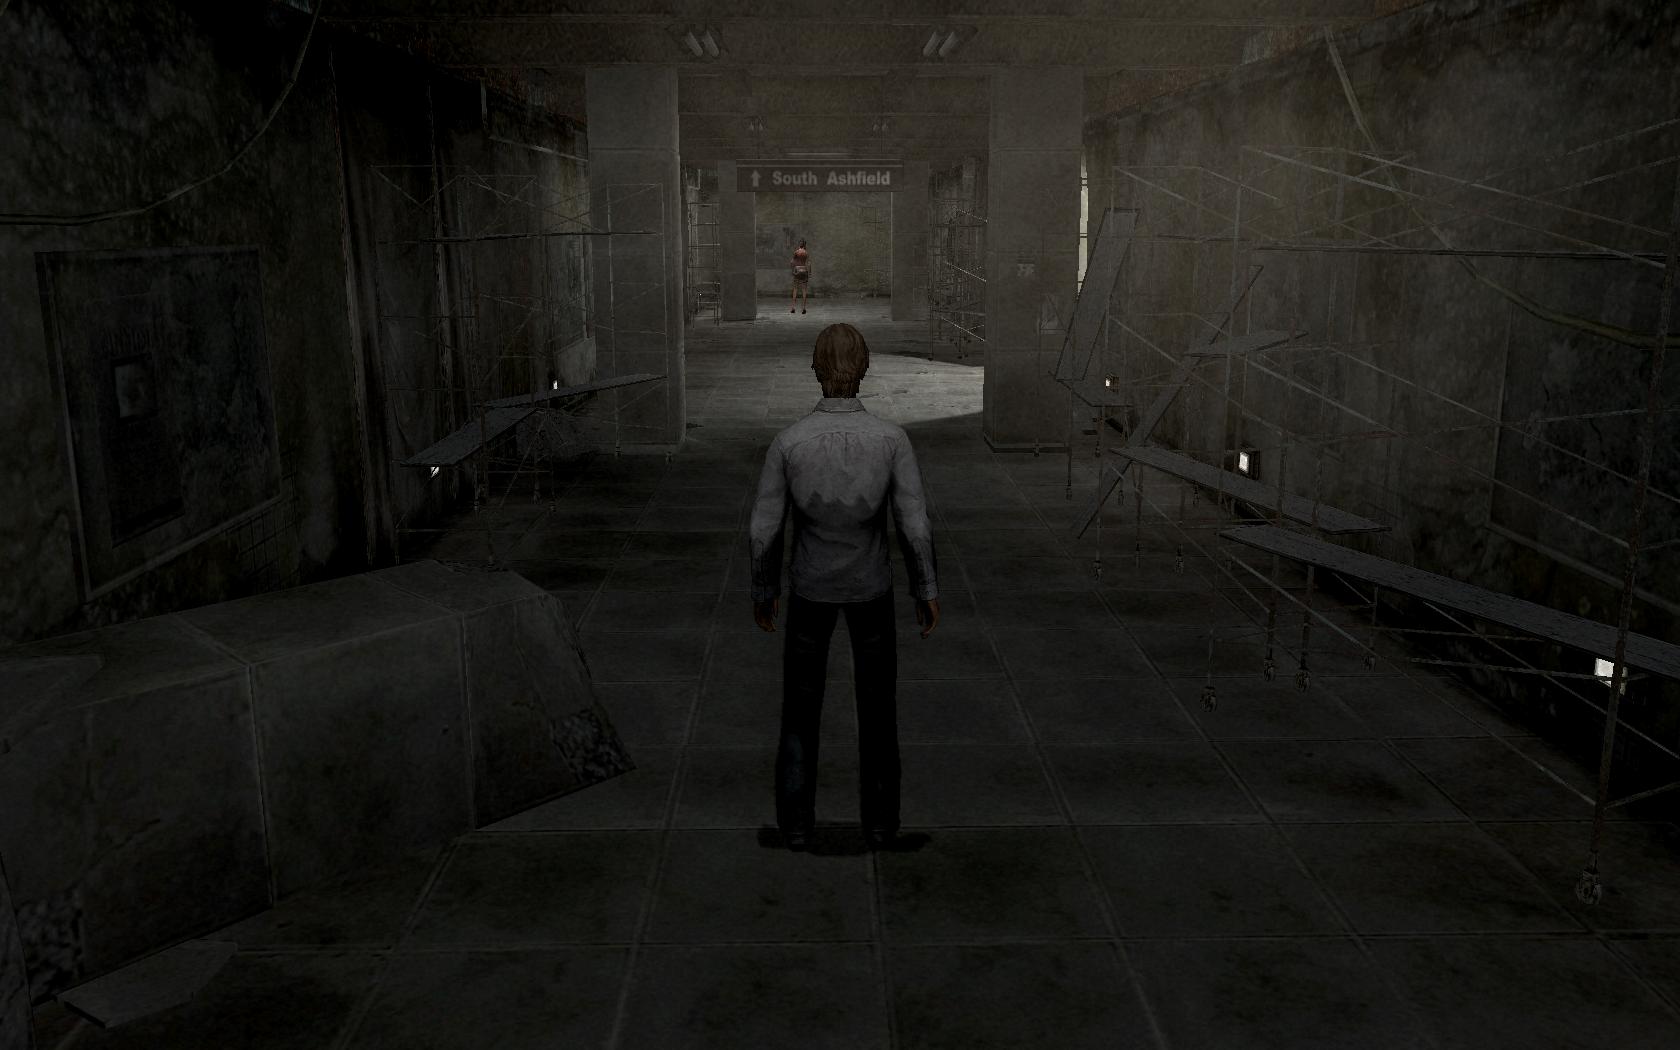 Silent Hill 4: The Room - Download for PC Free